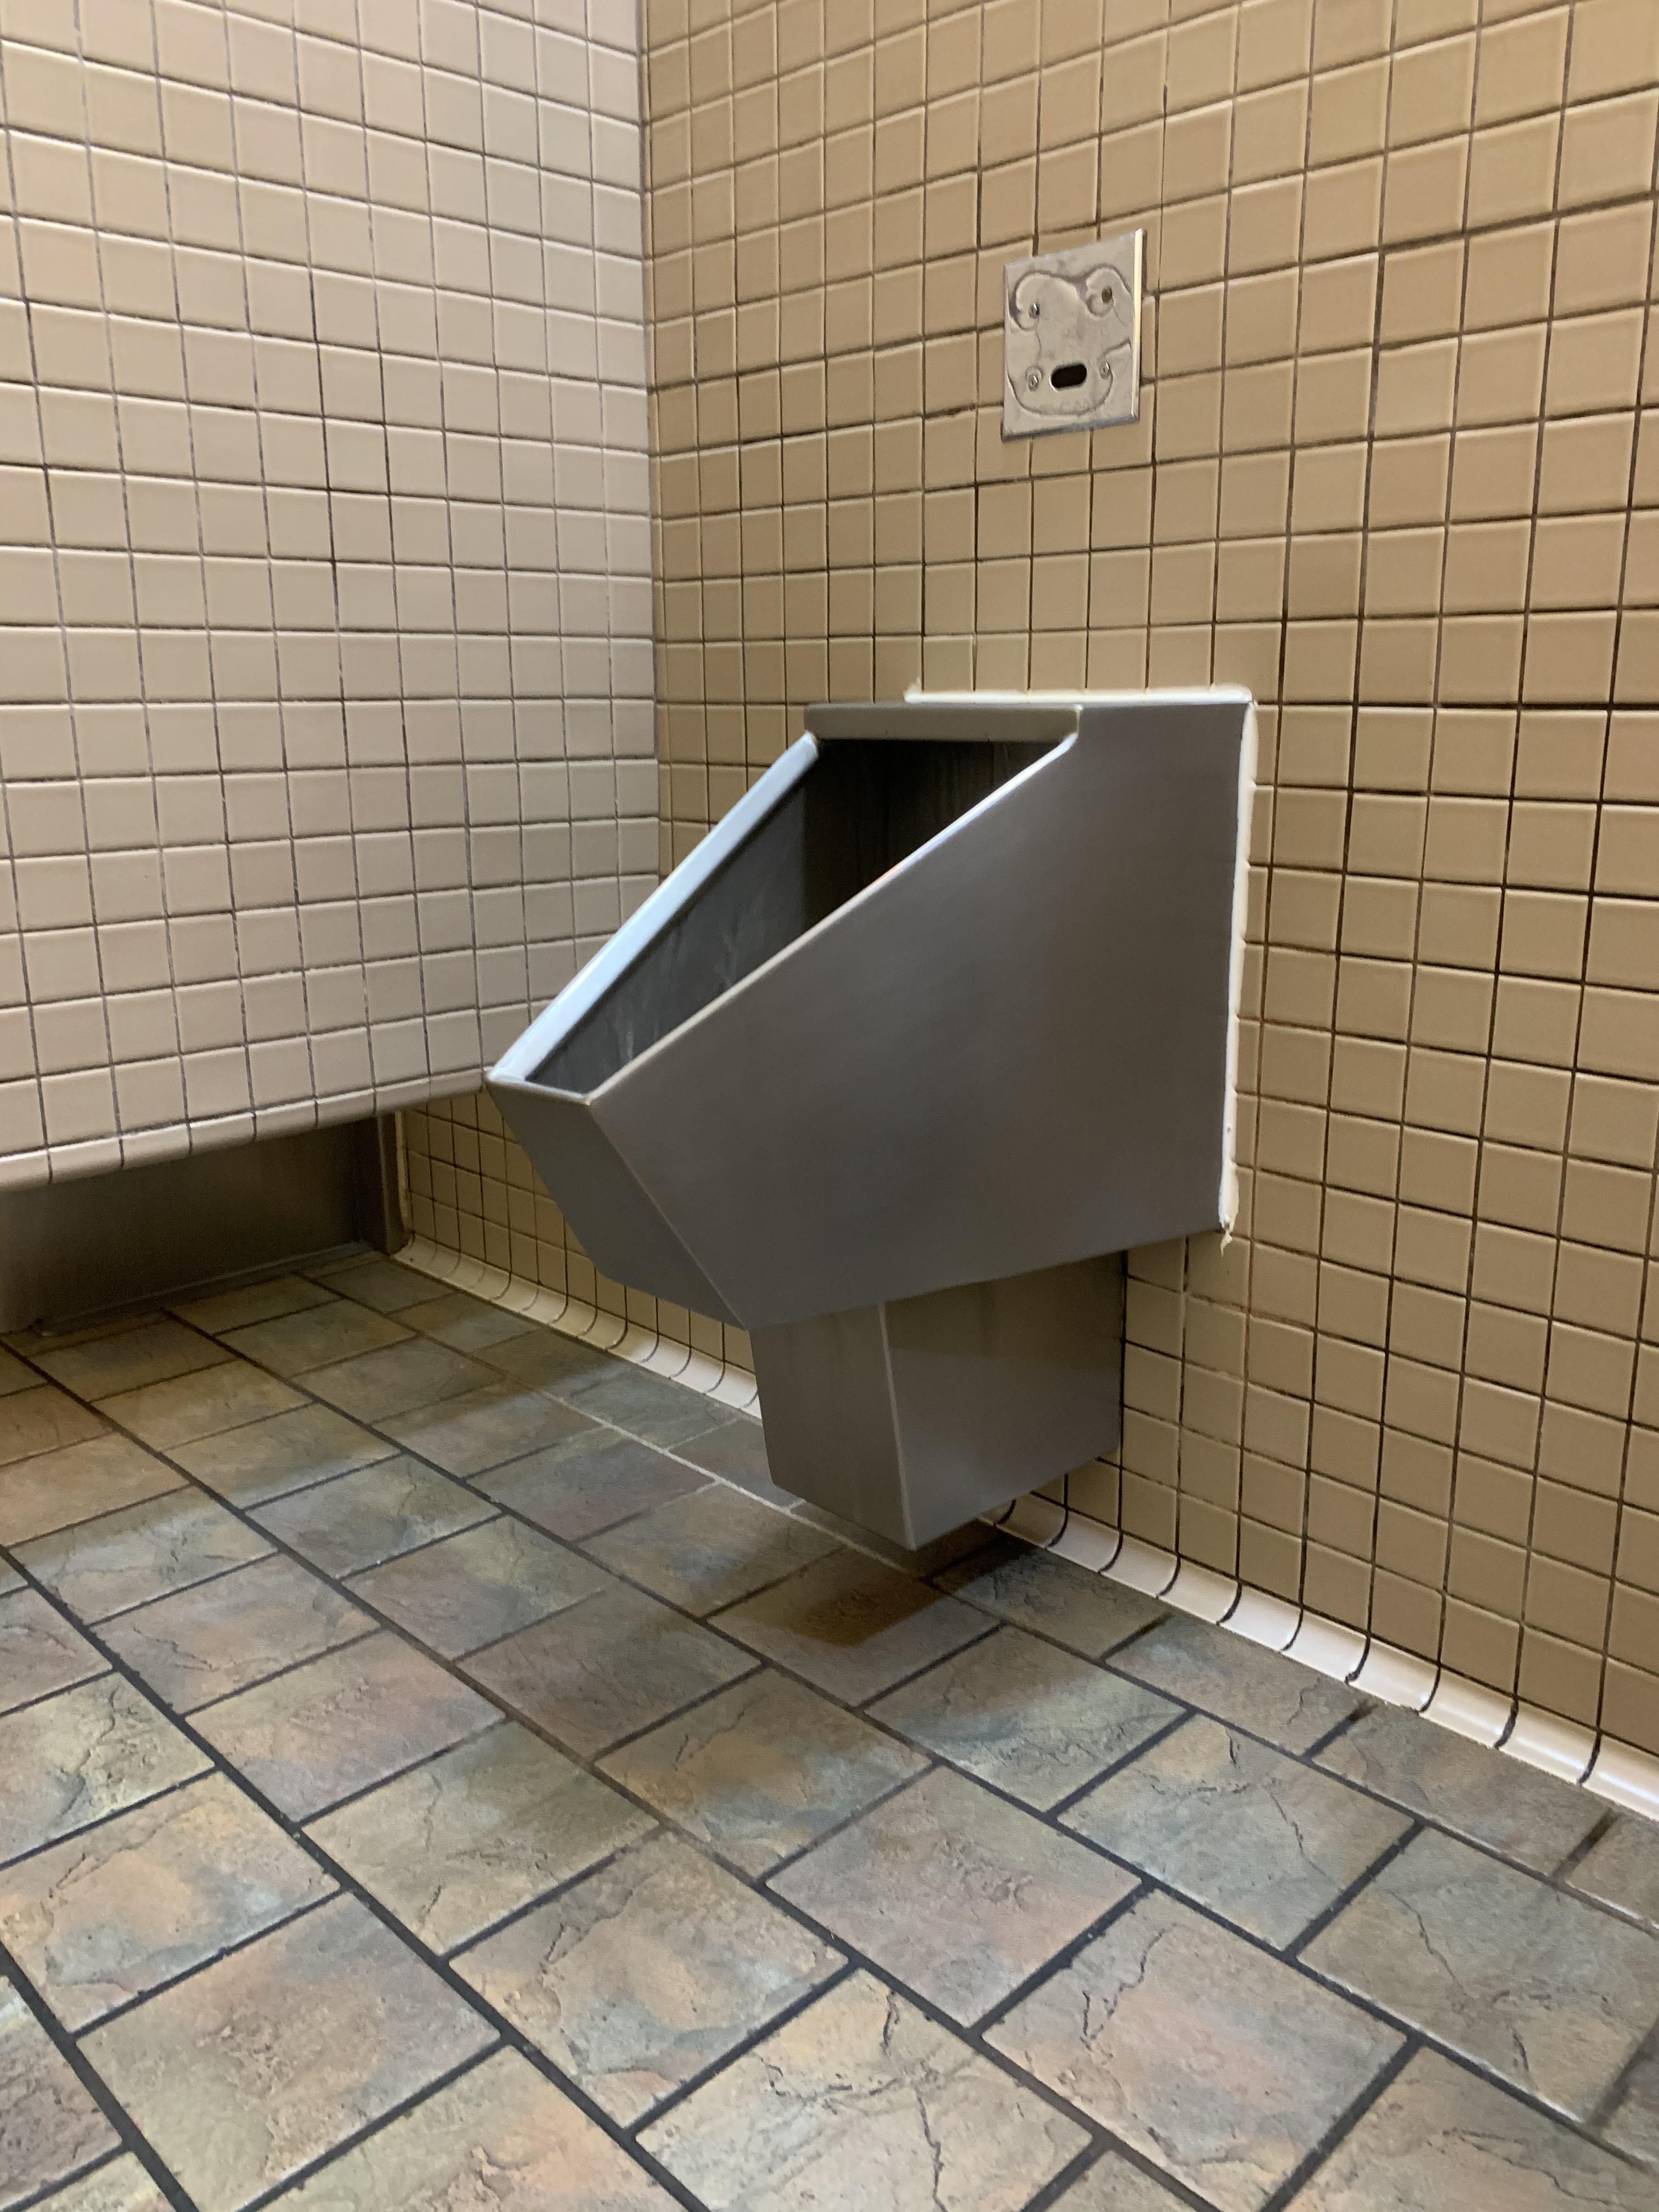 The all new Cyber Urinal